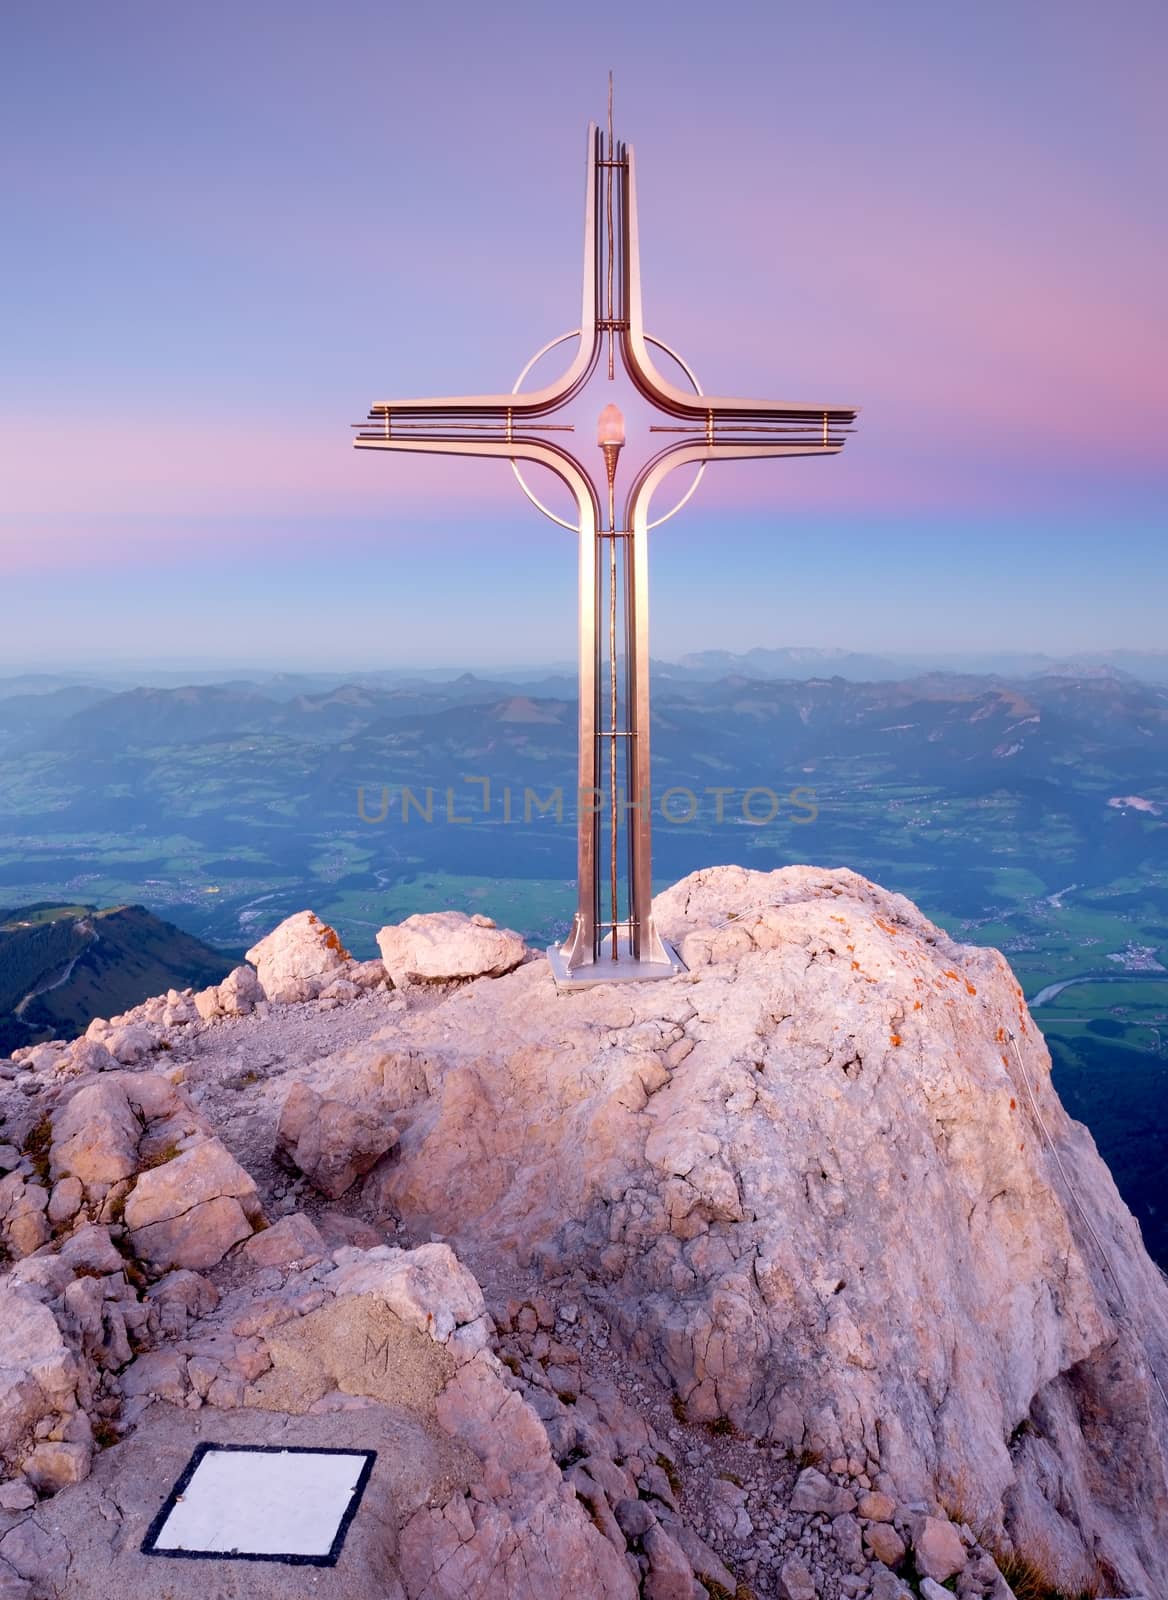 Peak of Hoher Göll. Iron cross at mountain top in Alp at Austria Germany border.  by rdonar2